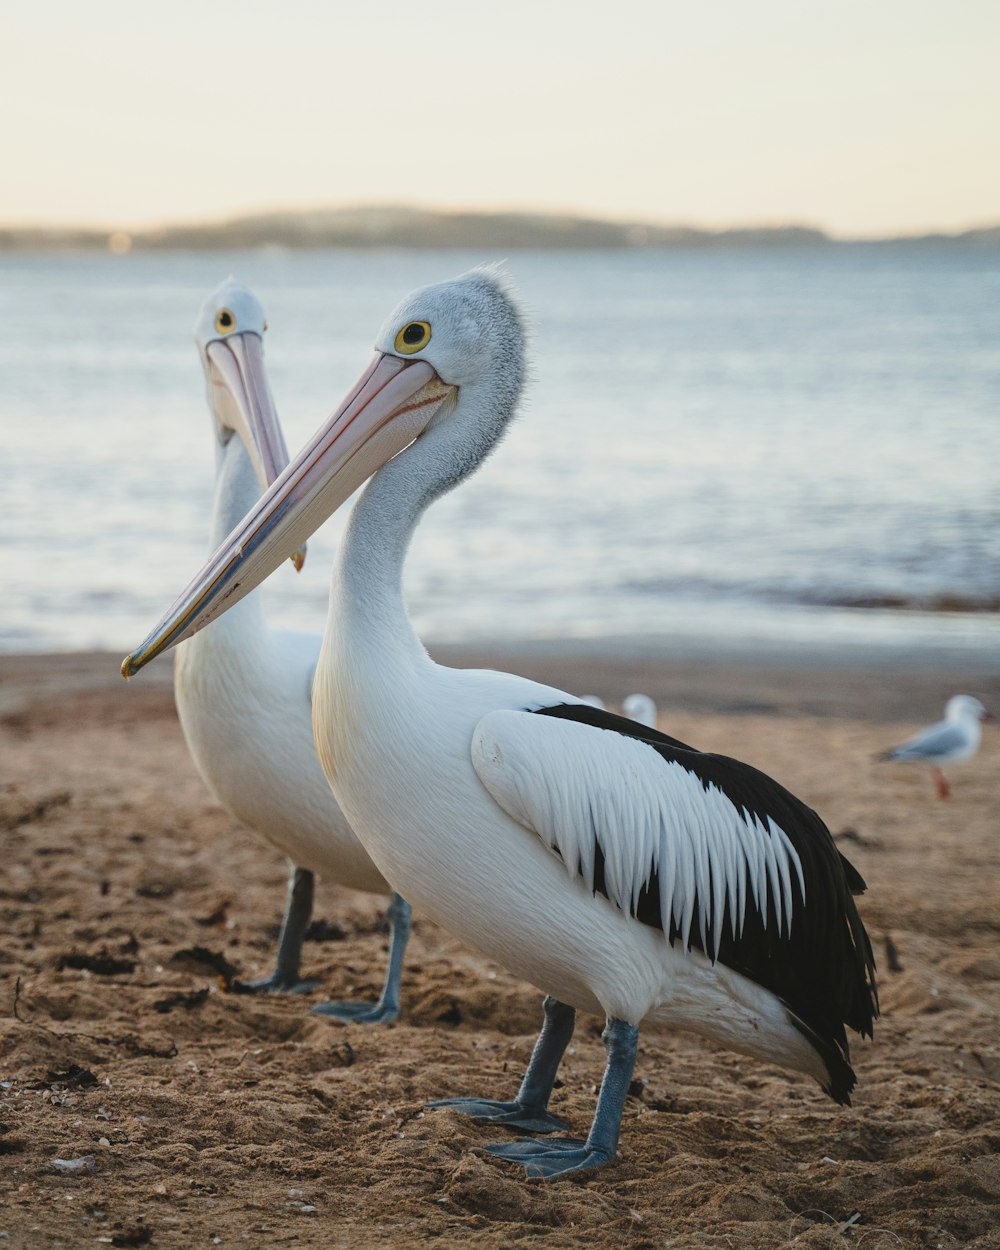 white pelican on brown sand near body of water during daytime